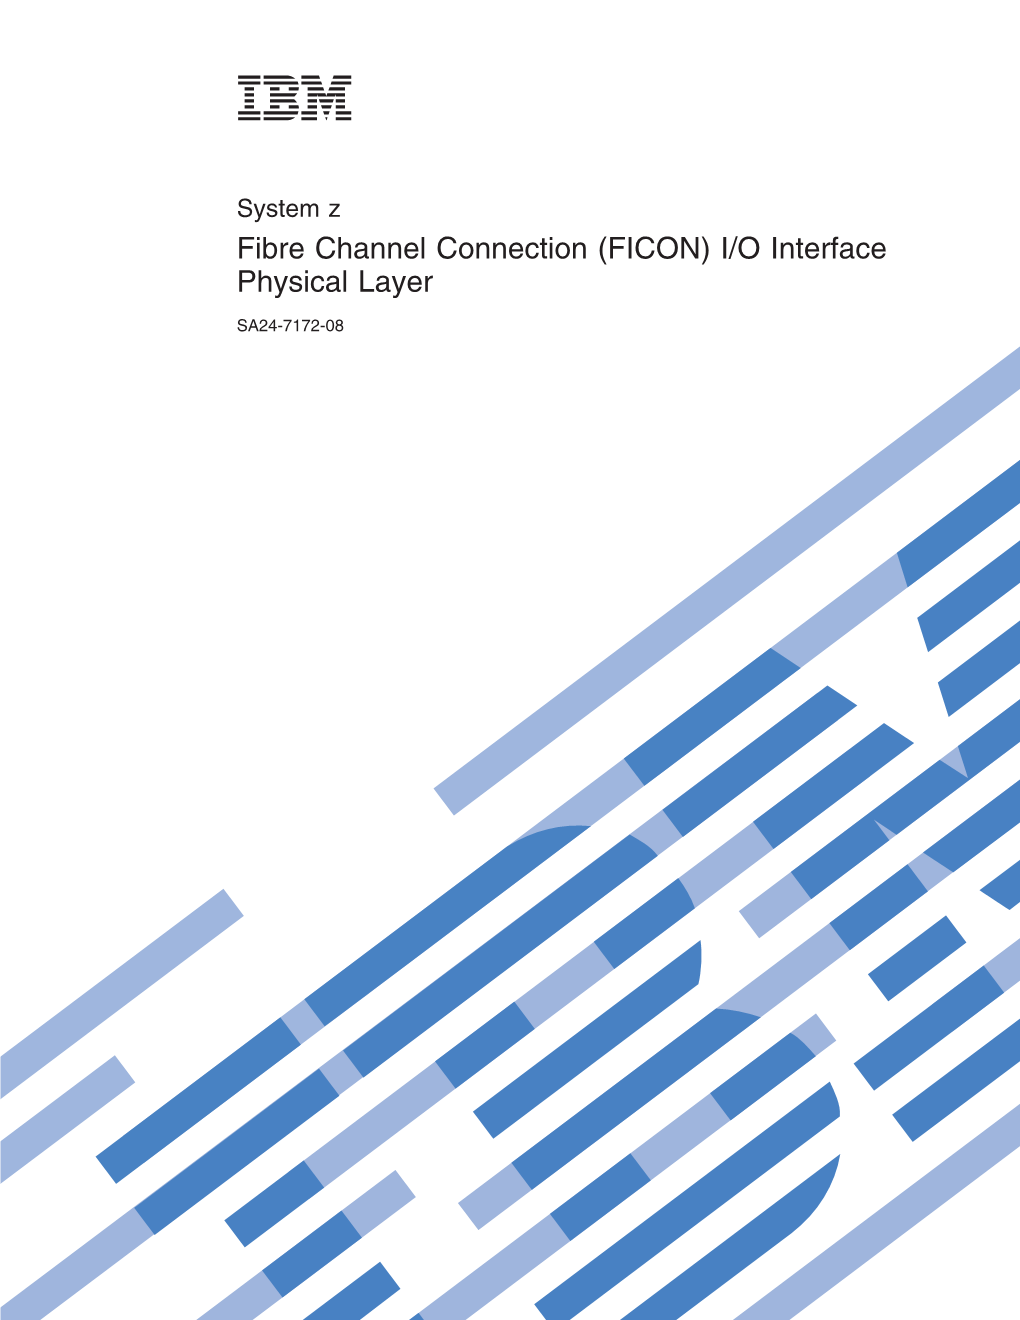 FICON Physical Layer Safety